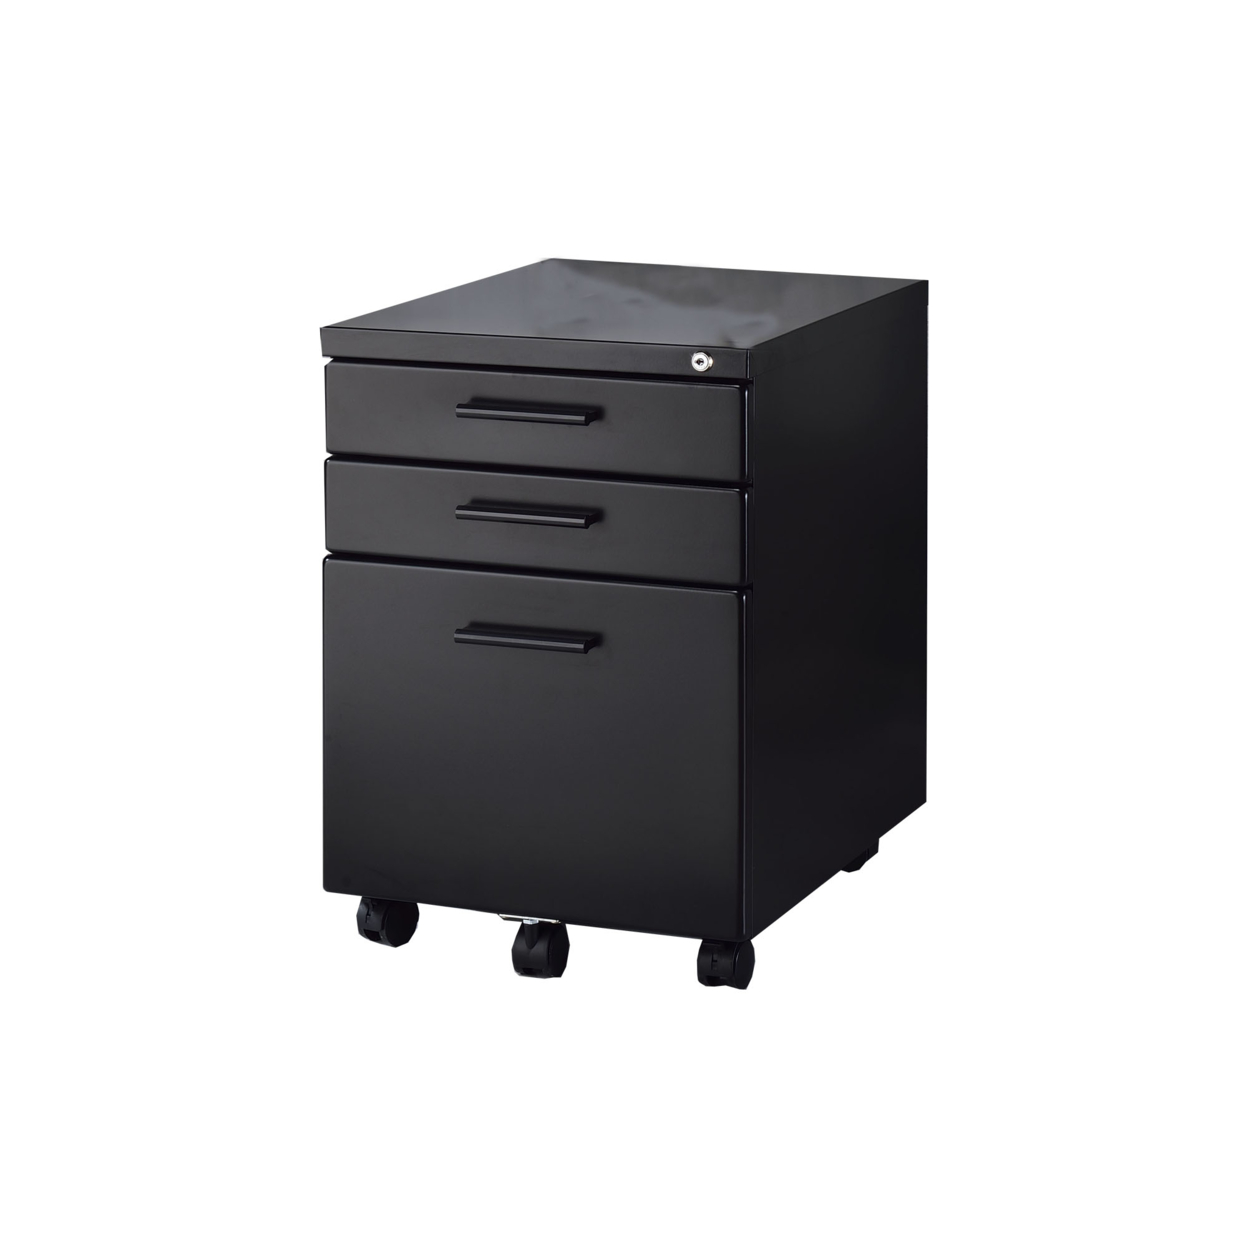 Contemporary Style File Cabinet With Lock System And Caster Support, Black- Saltoro Sherpi